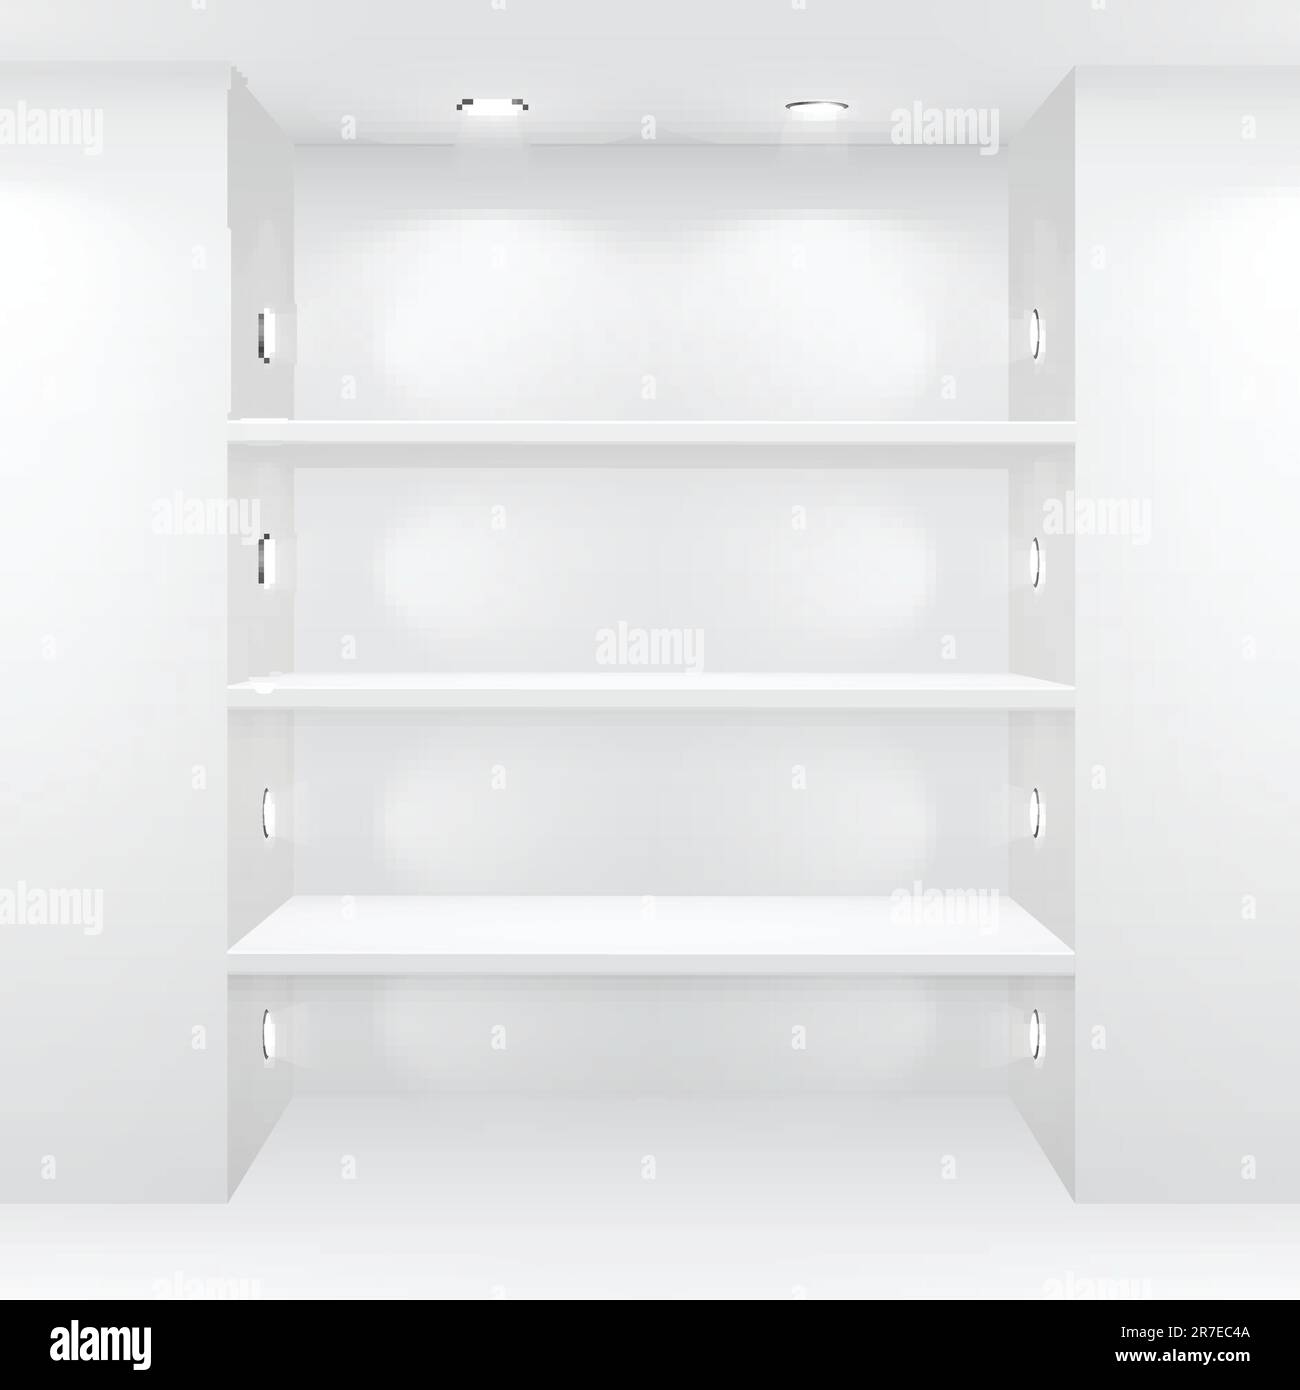 Gallery Interior with empty shelves. Vector illustration. Stock Vector